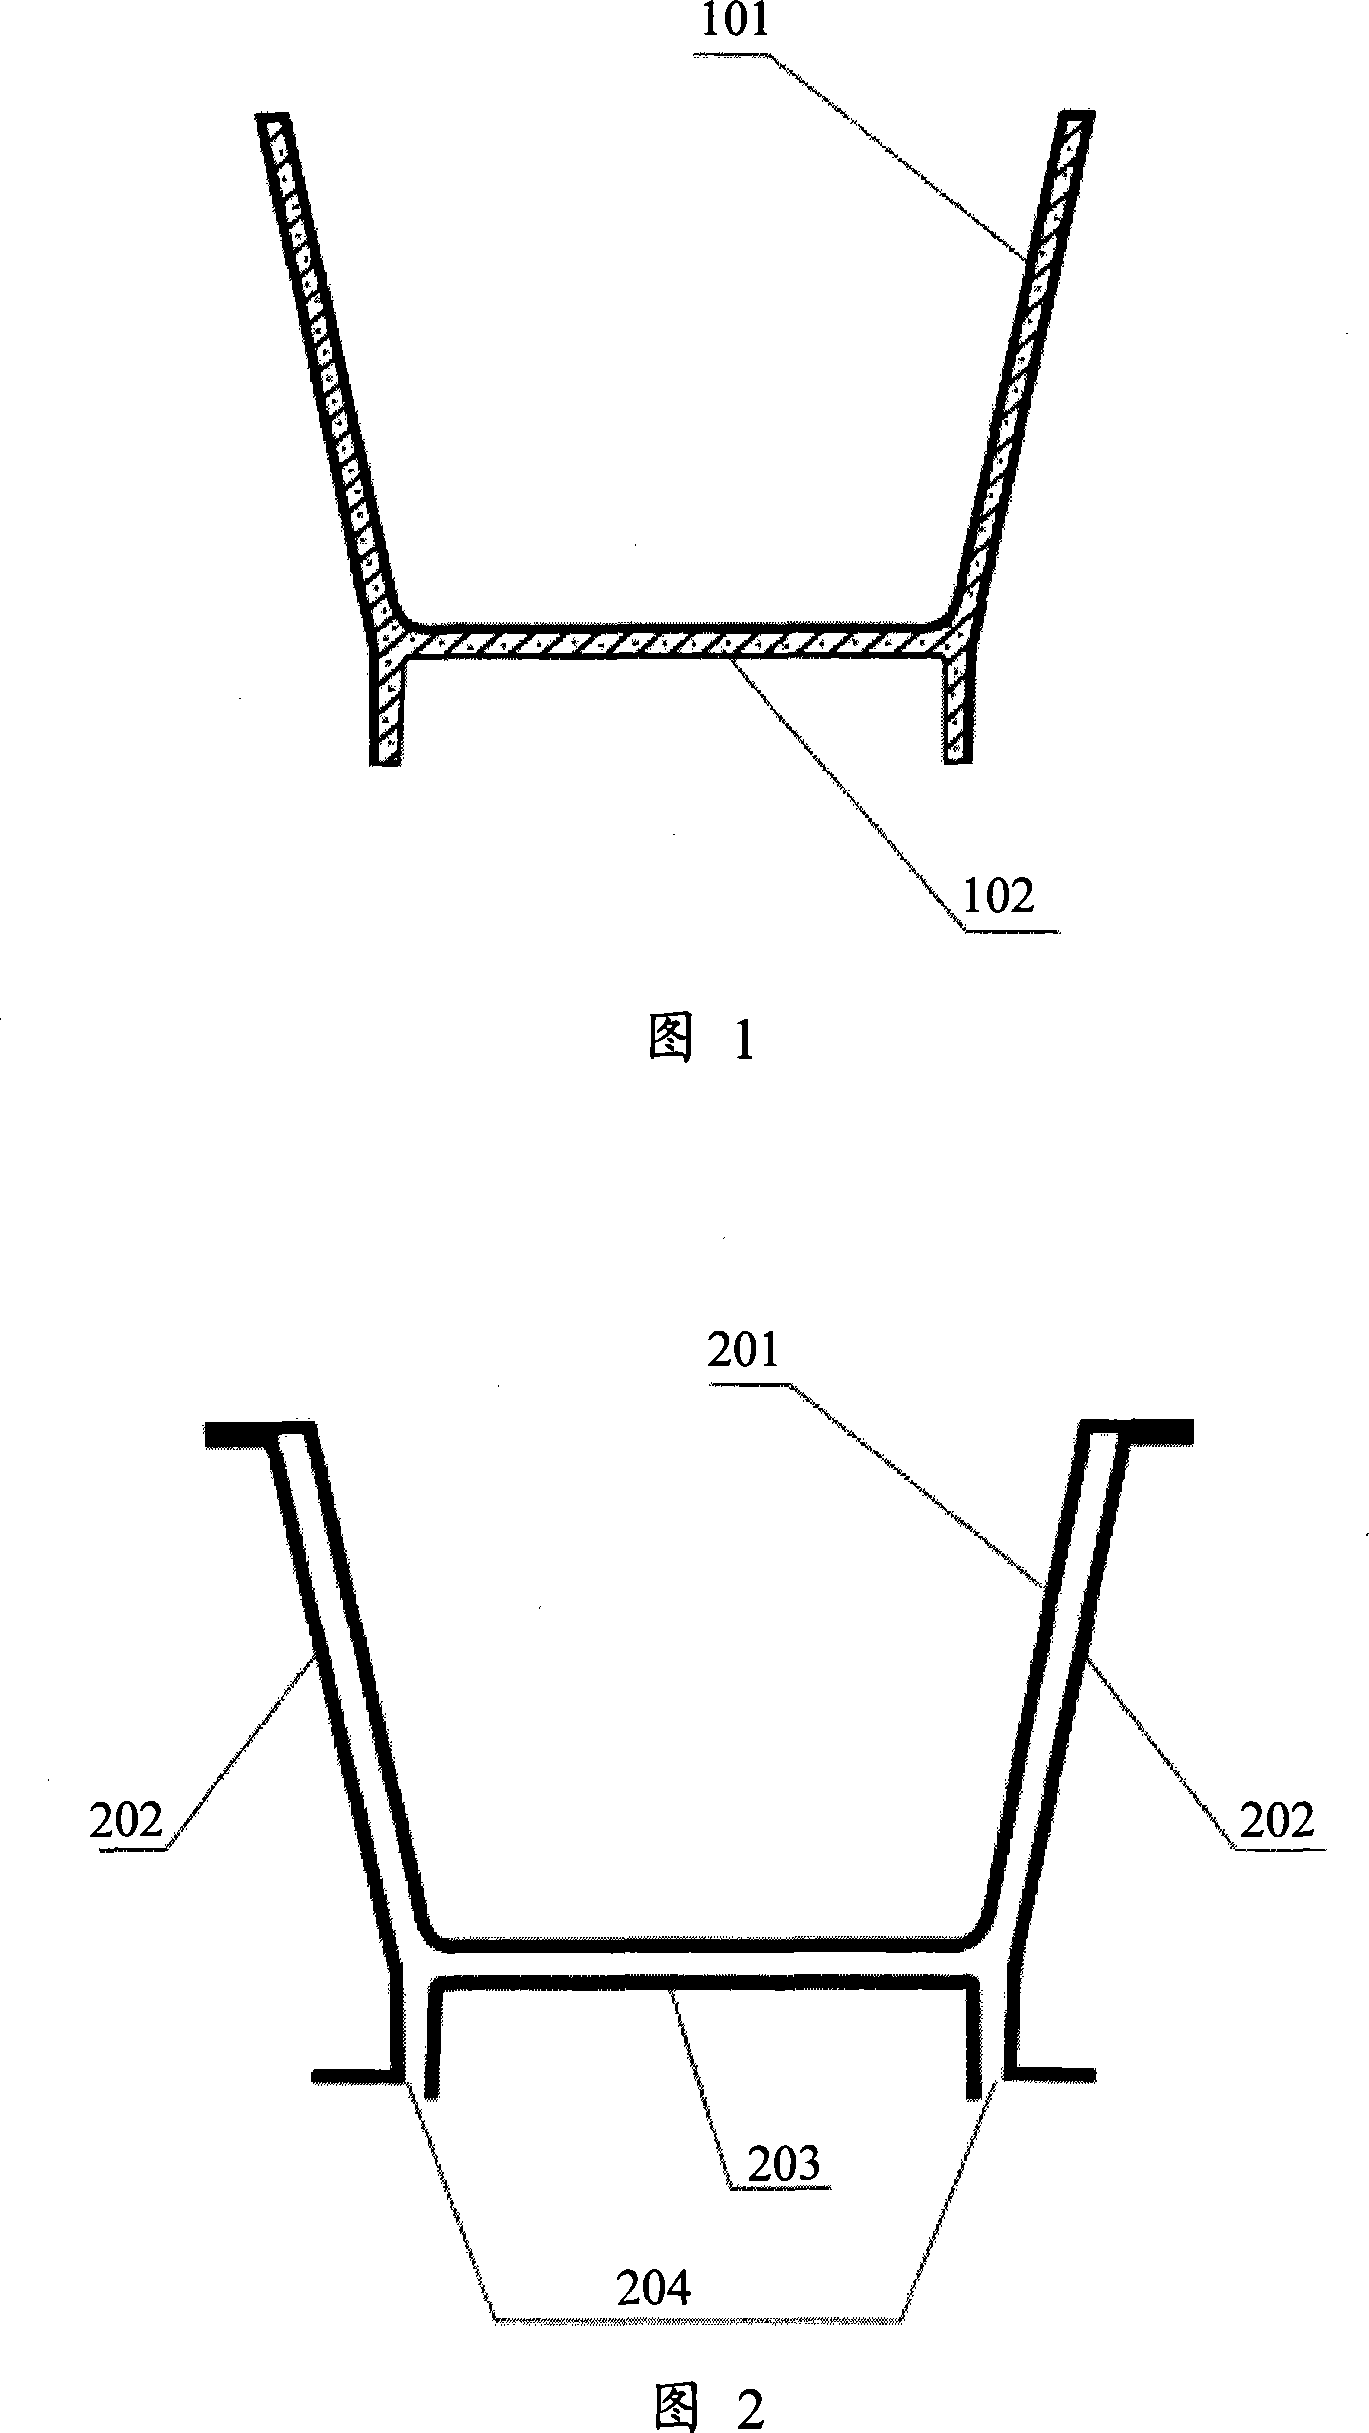 Artificial stone integral bathtub and method for making same